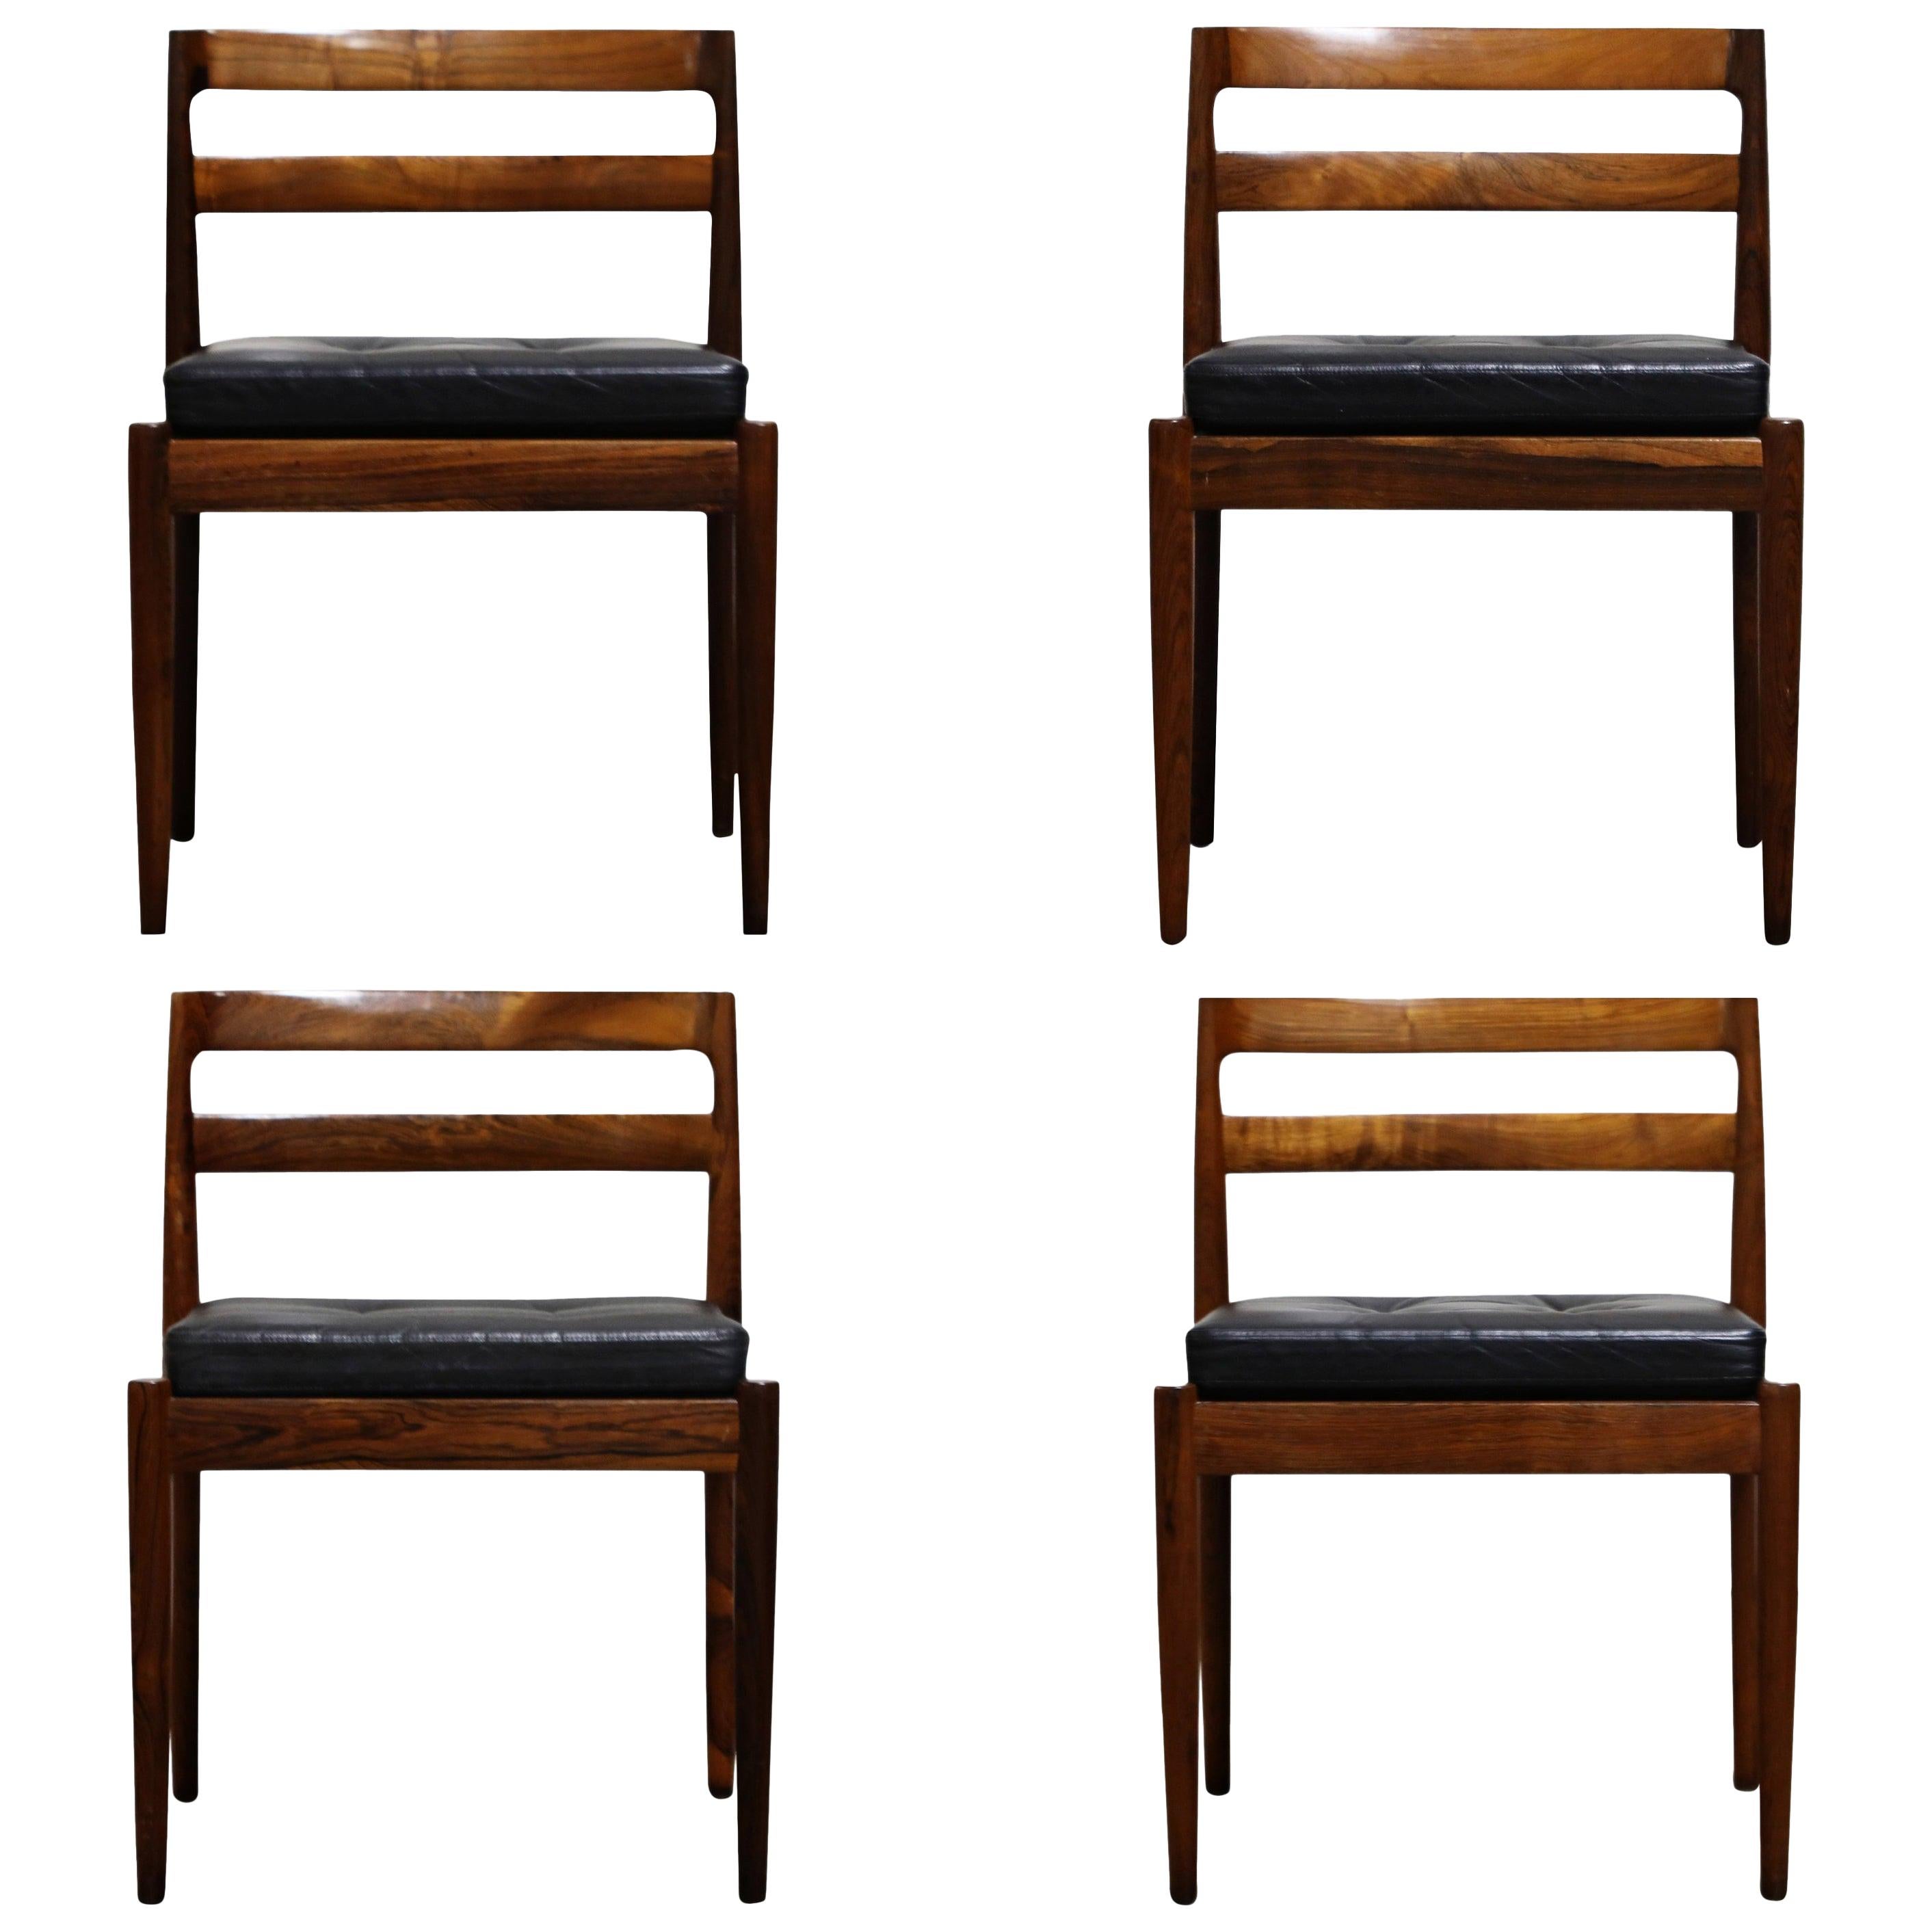 Rosewood "Universe" Chairs by Kai Kristiansen for Magnus Olesen, Signed Set of 4